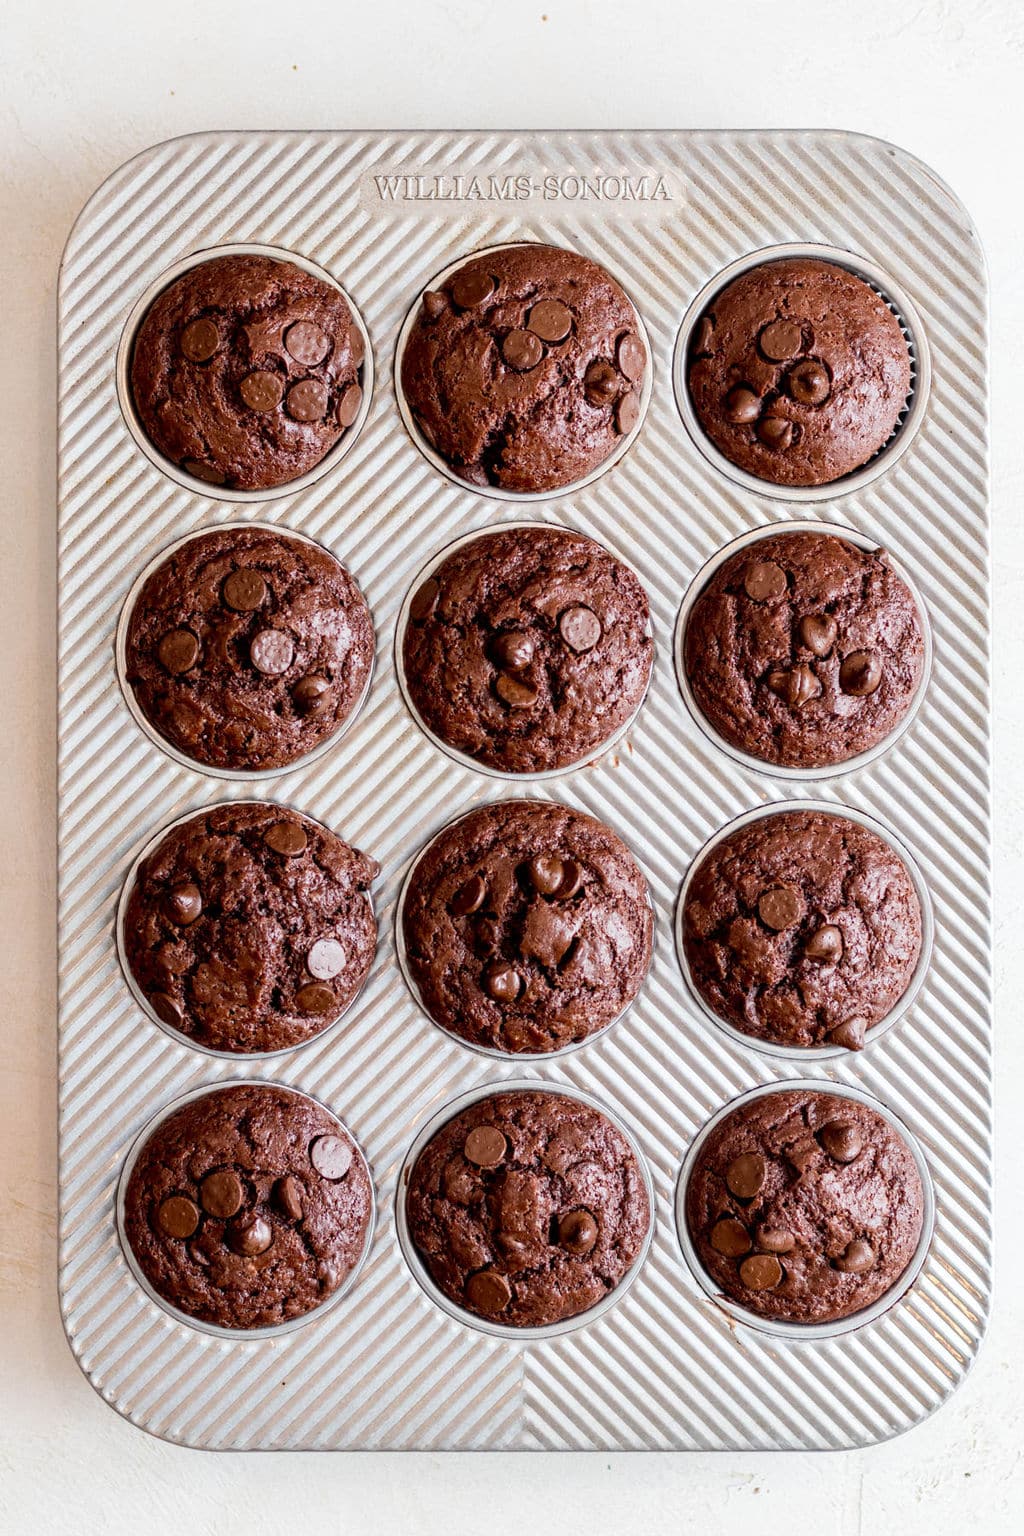 baked chocolate muffins in a metal baking tin.